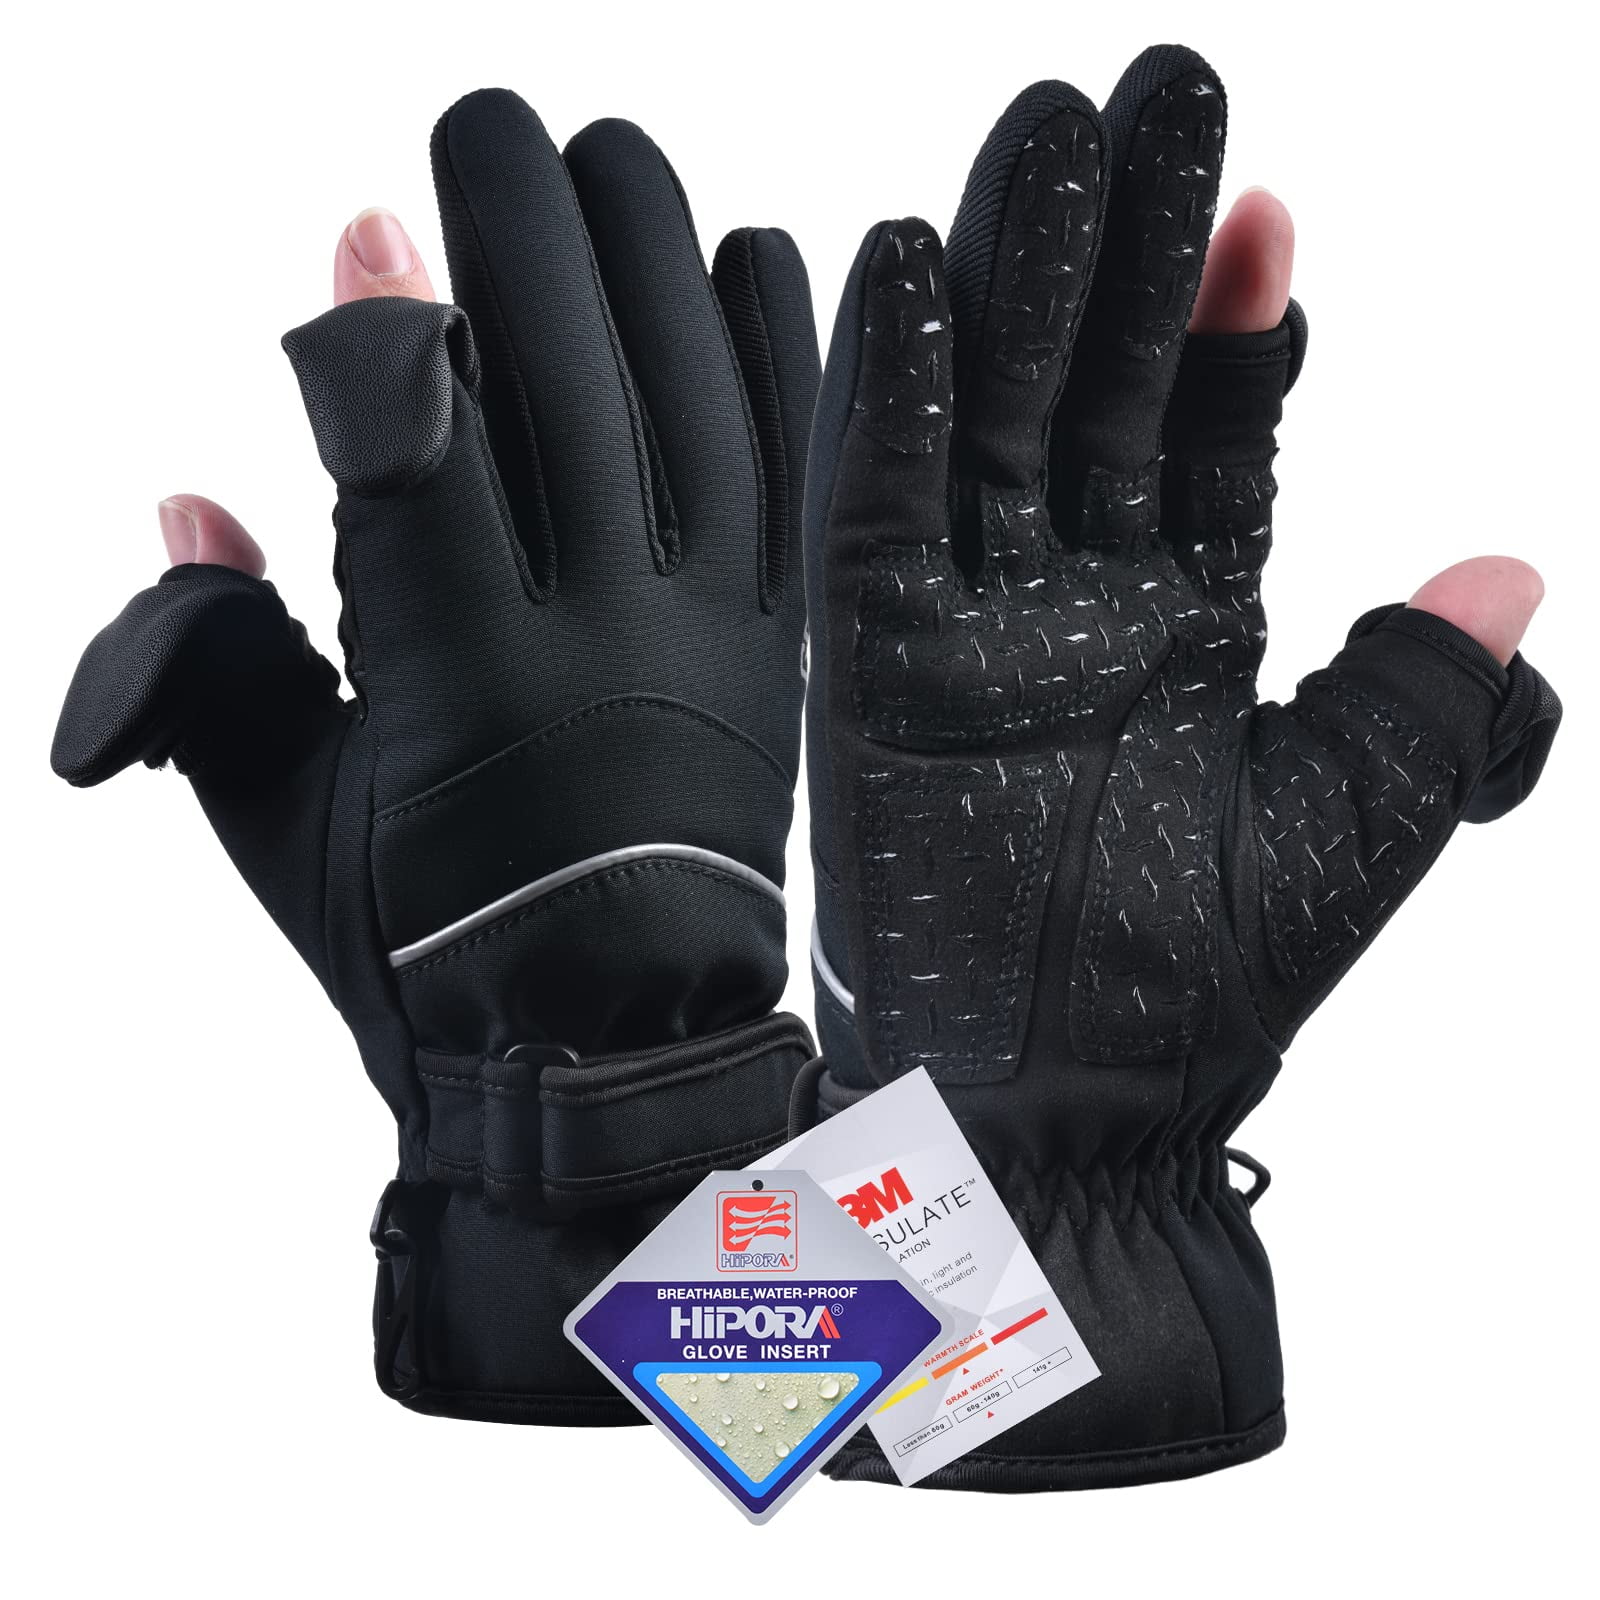 Goture Winter Gloves for Fishing Ski, with 3M Nepal